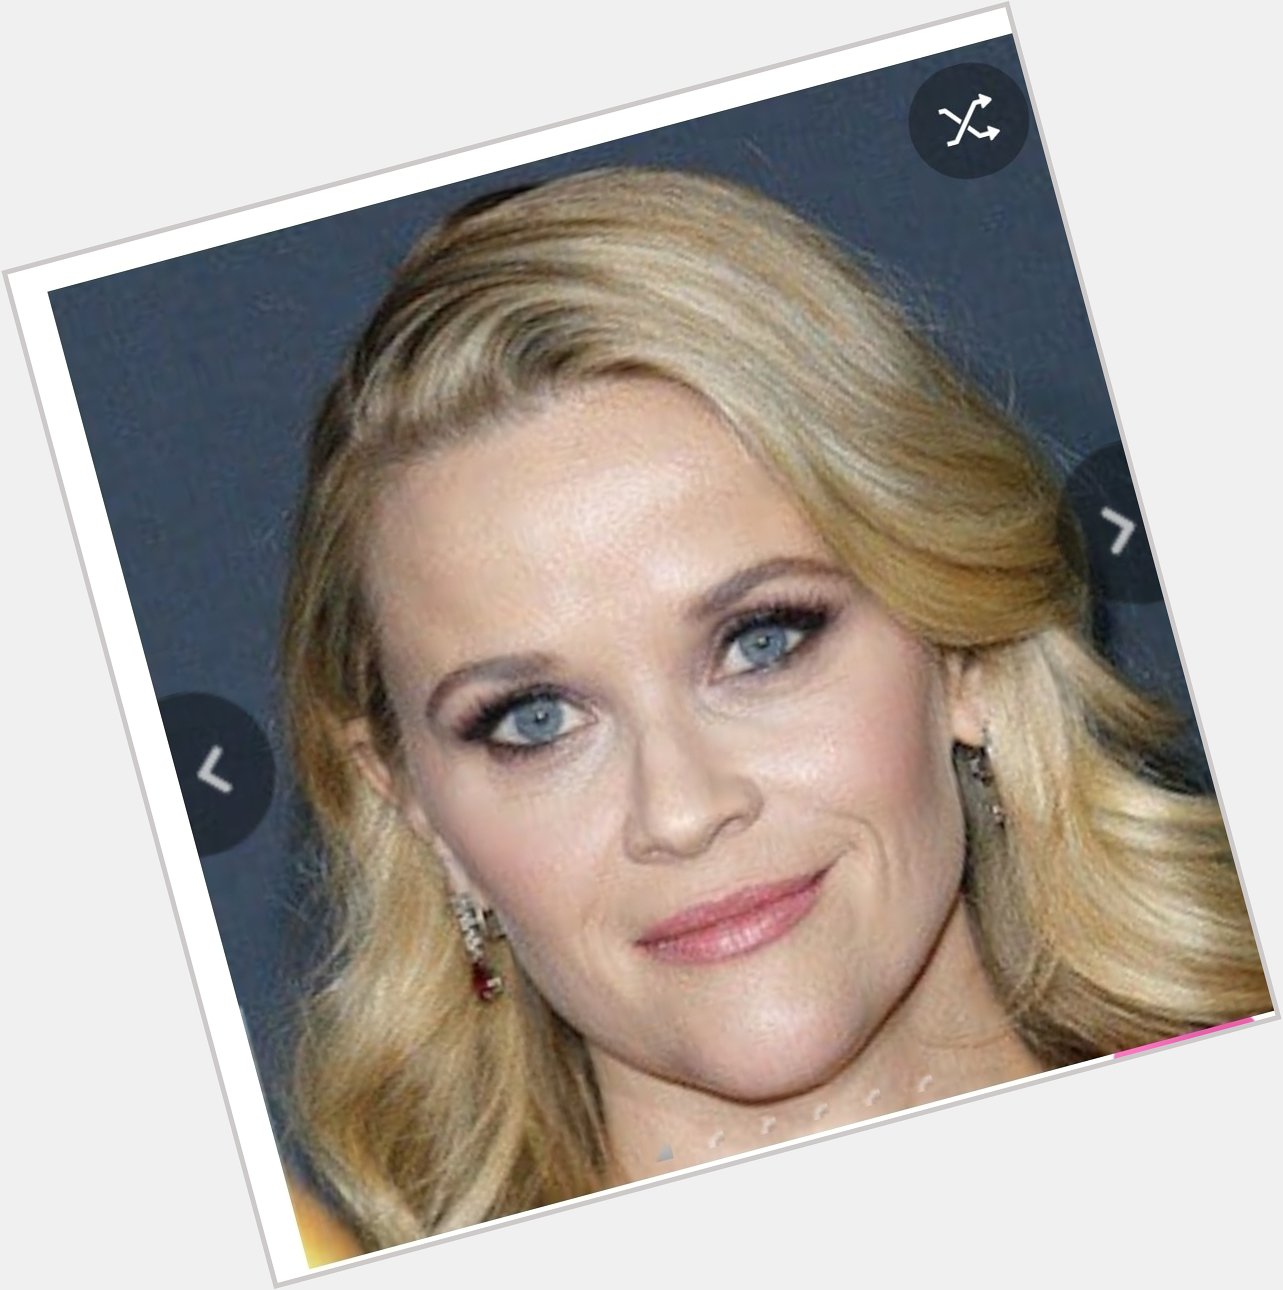 Happy birthday to a wonderful actress. Happy birthday to Reese Witherspoon 